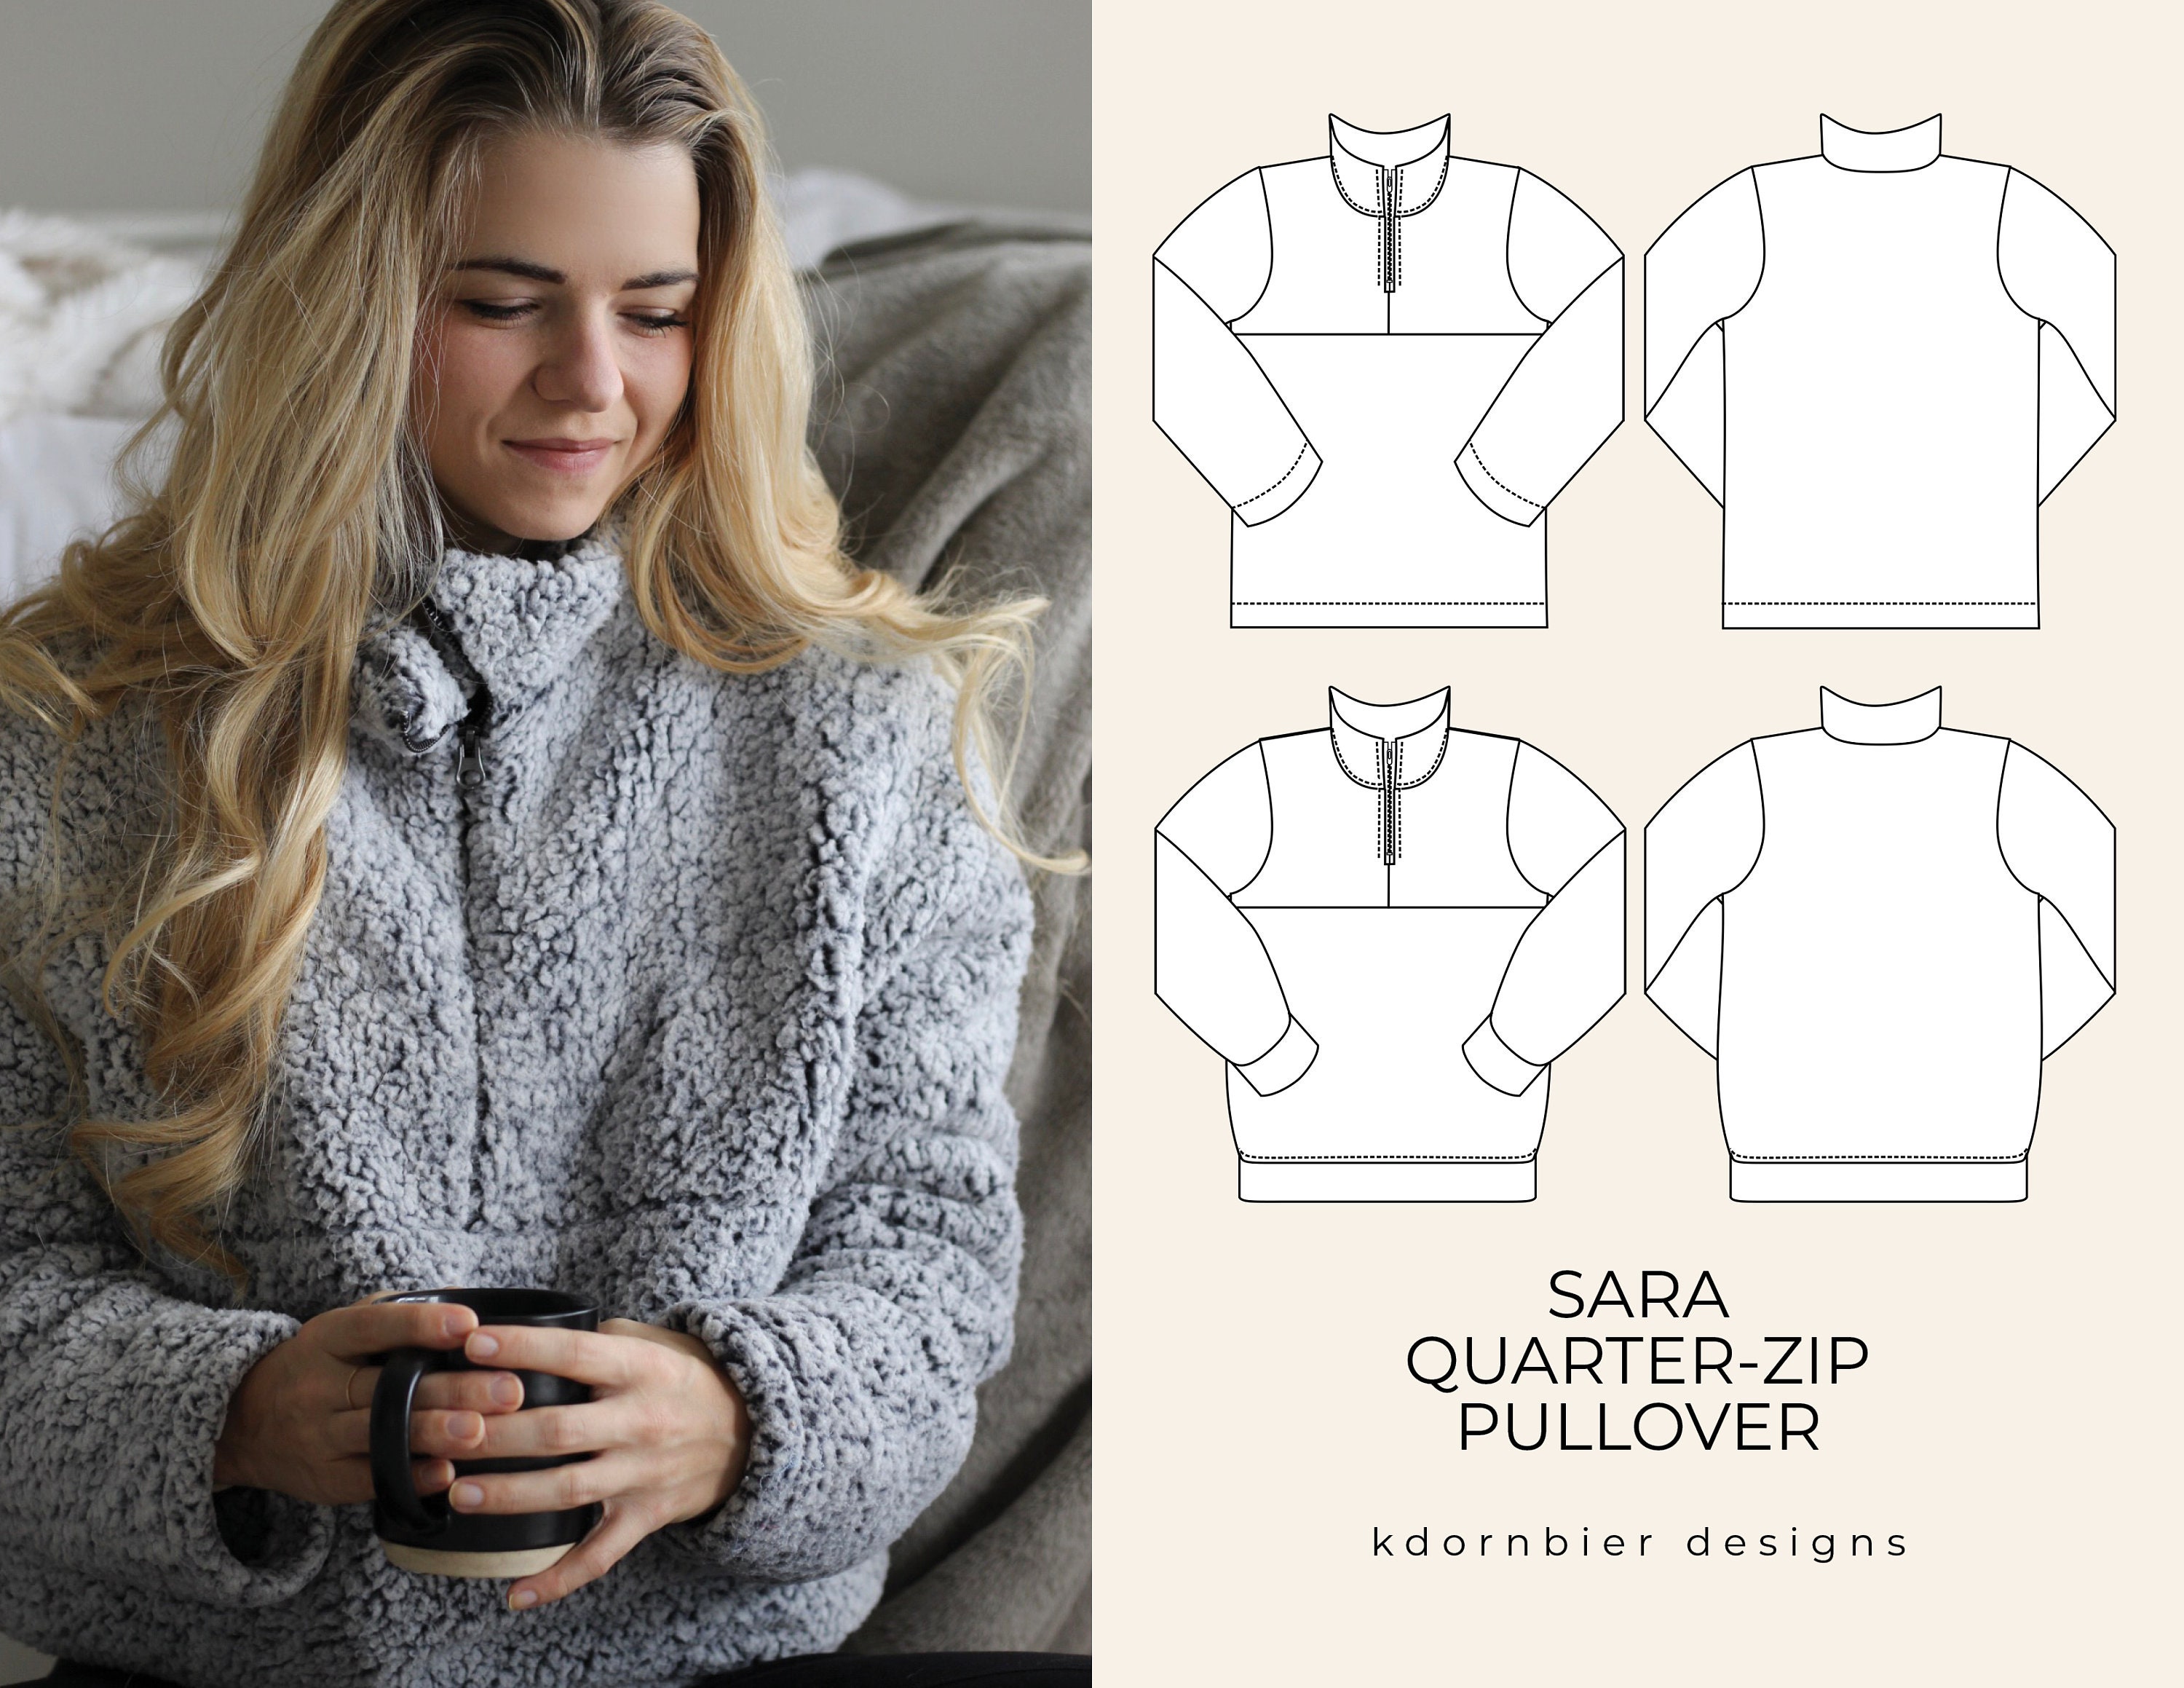 Free People C.O.Z.Y. Pullover – Libby Story